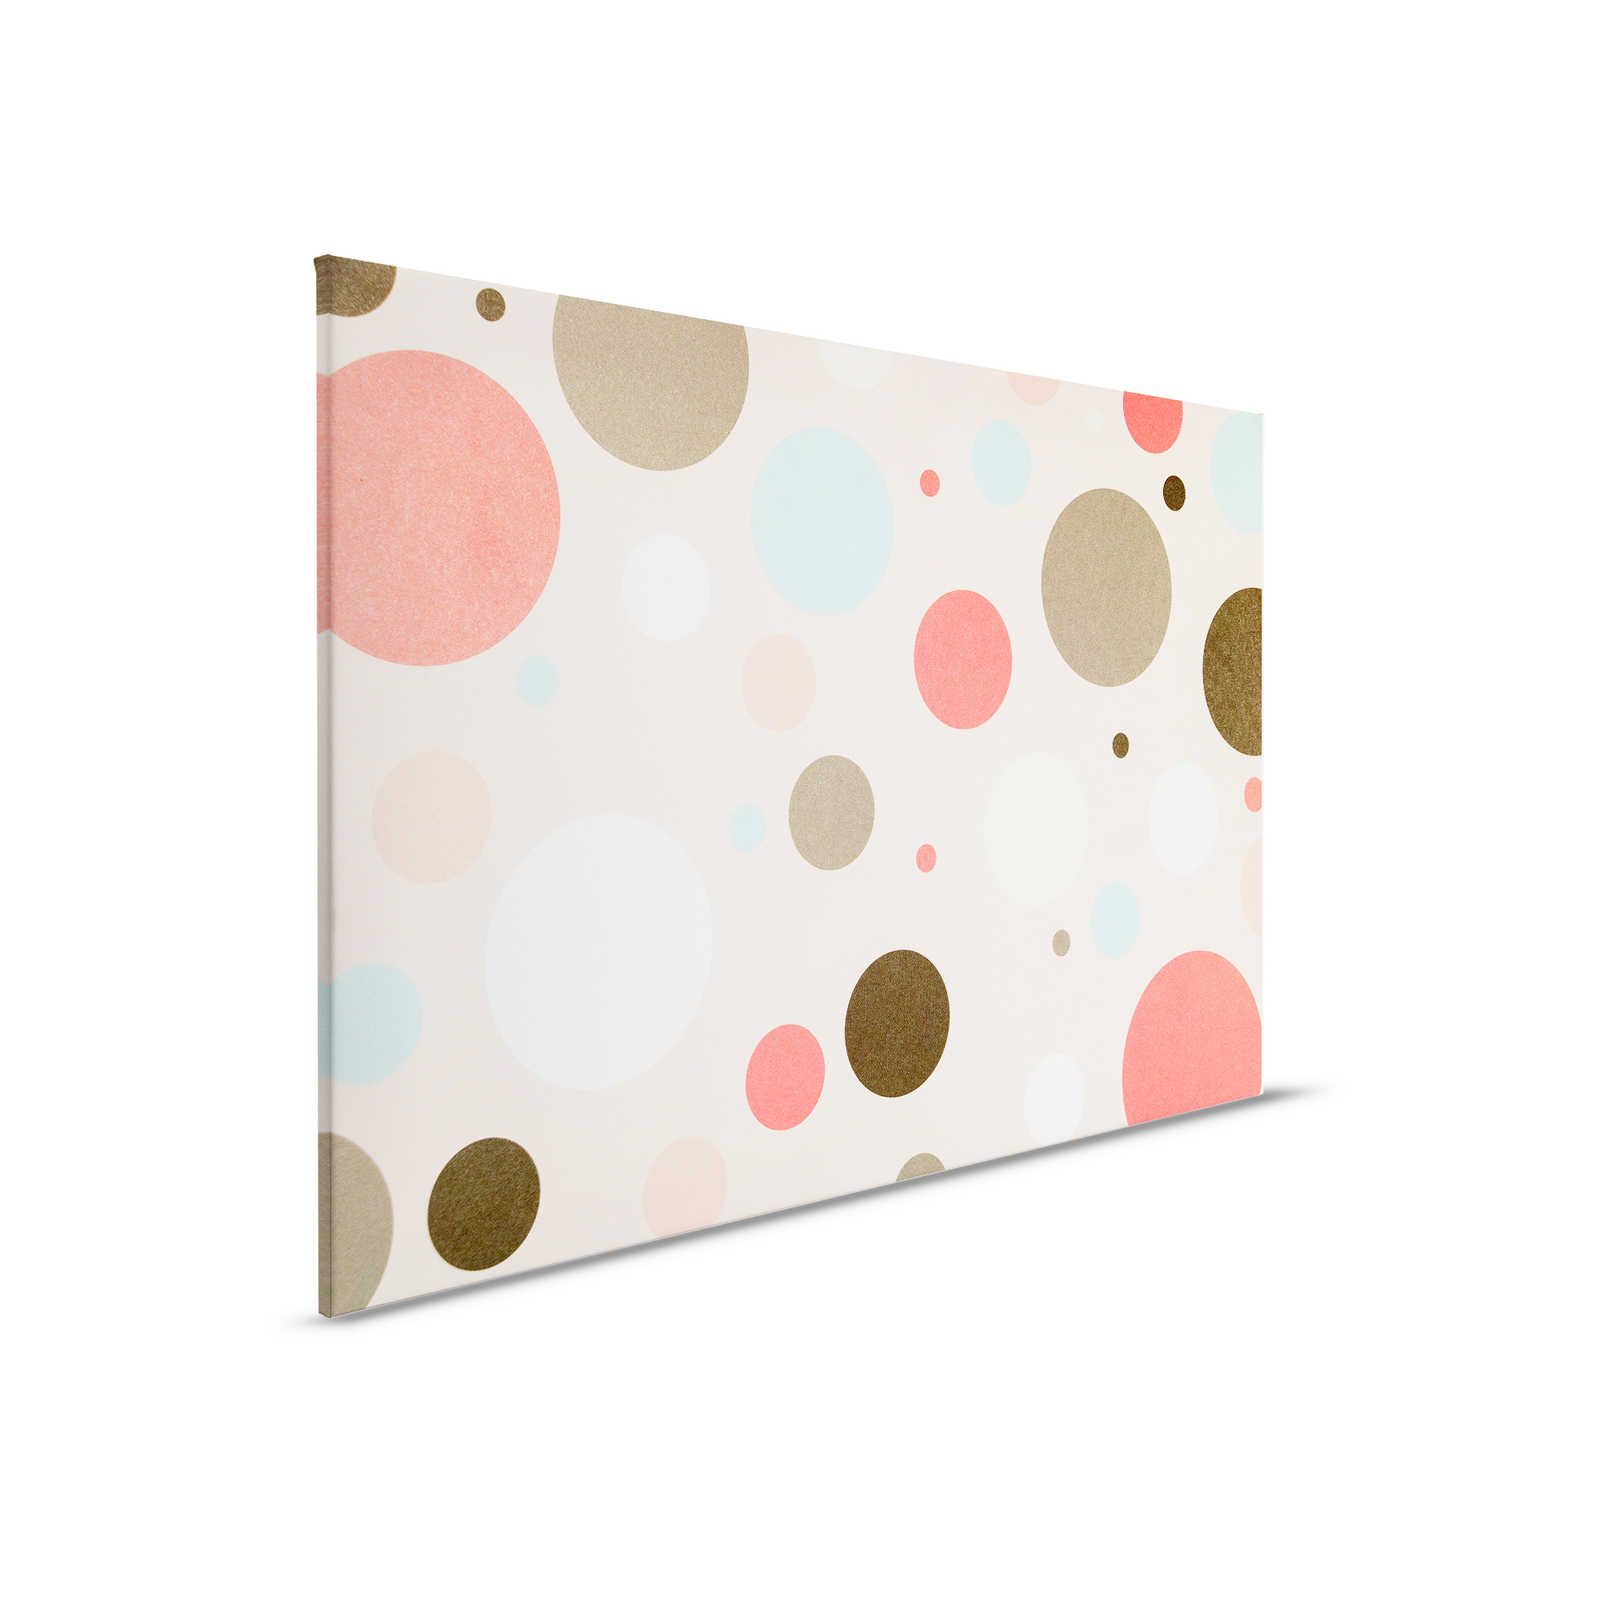         Canvas for children's room with colourful circles - 90 cm x 60 cm
    